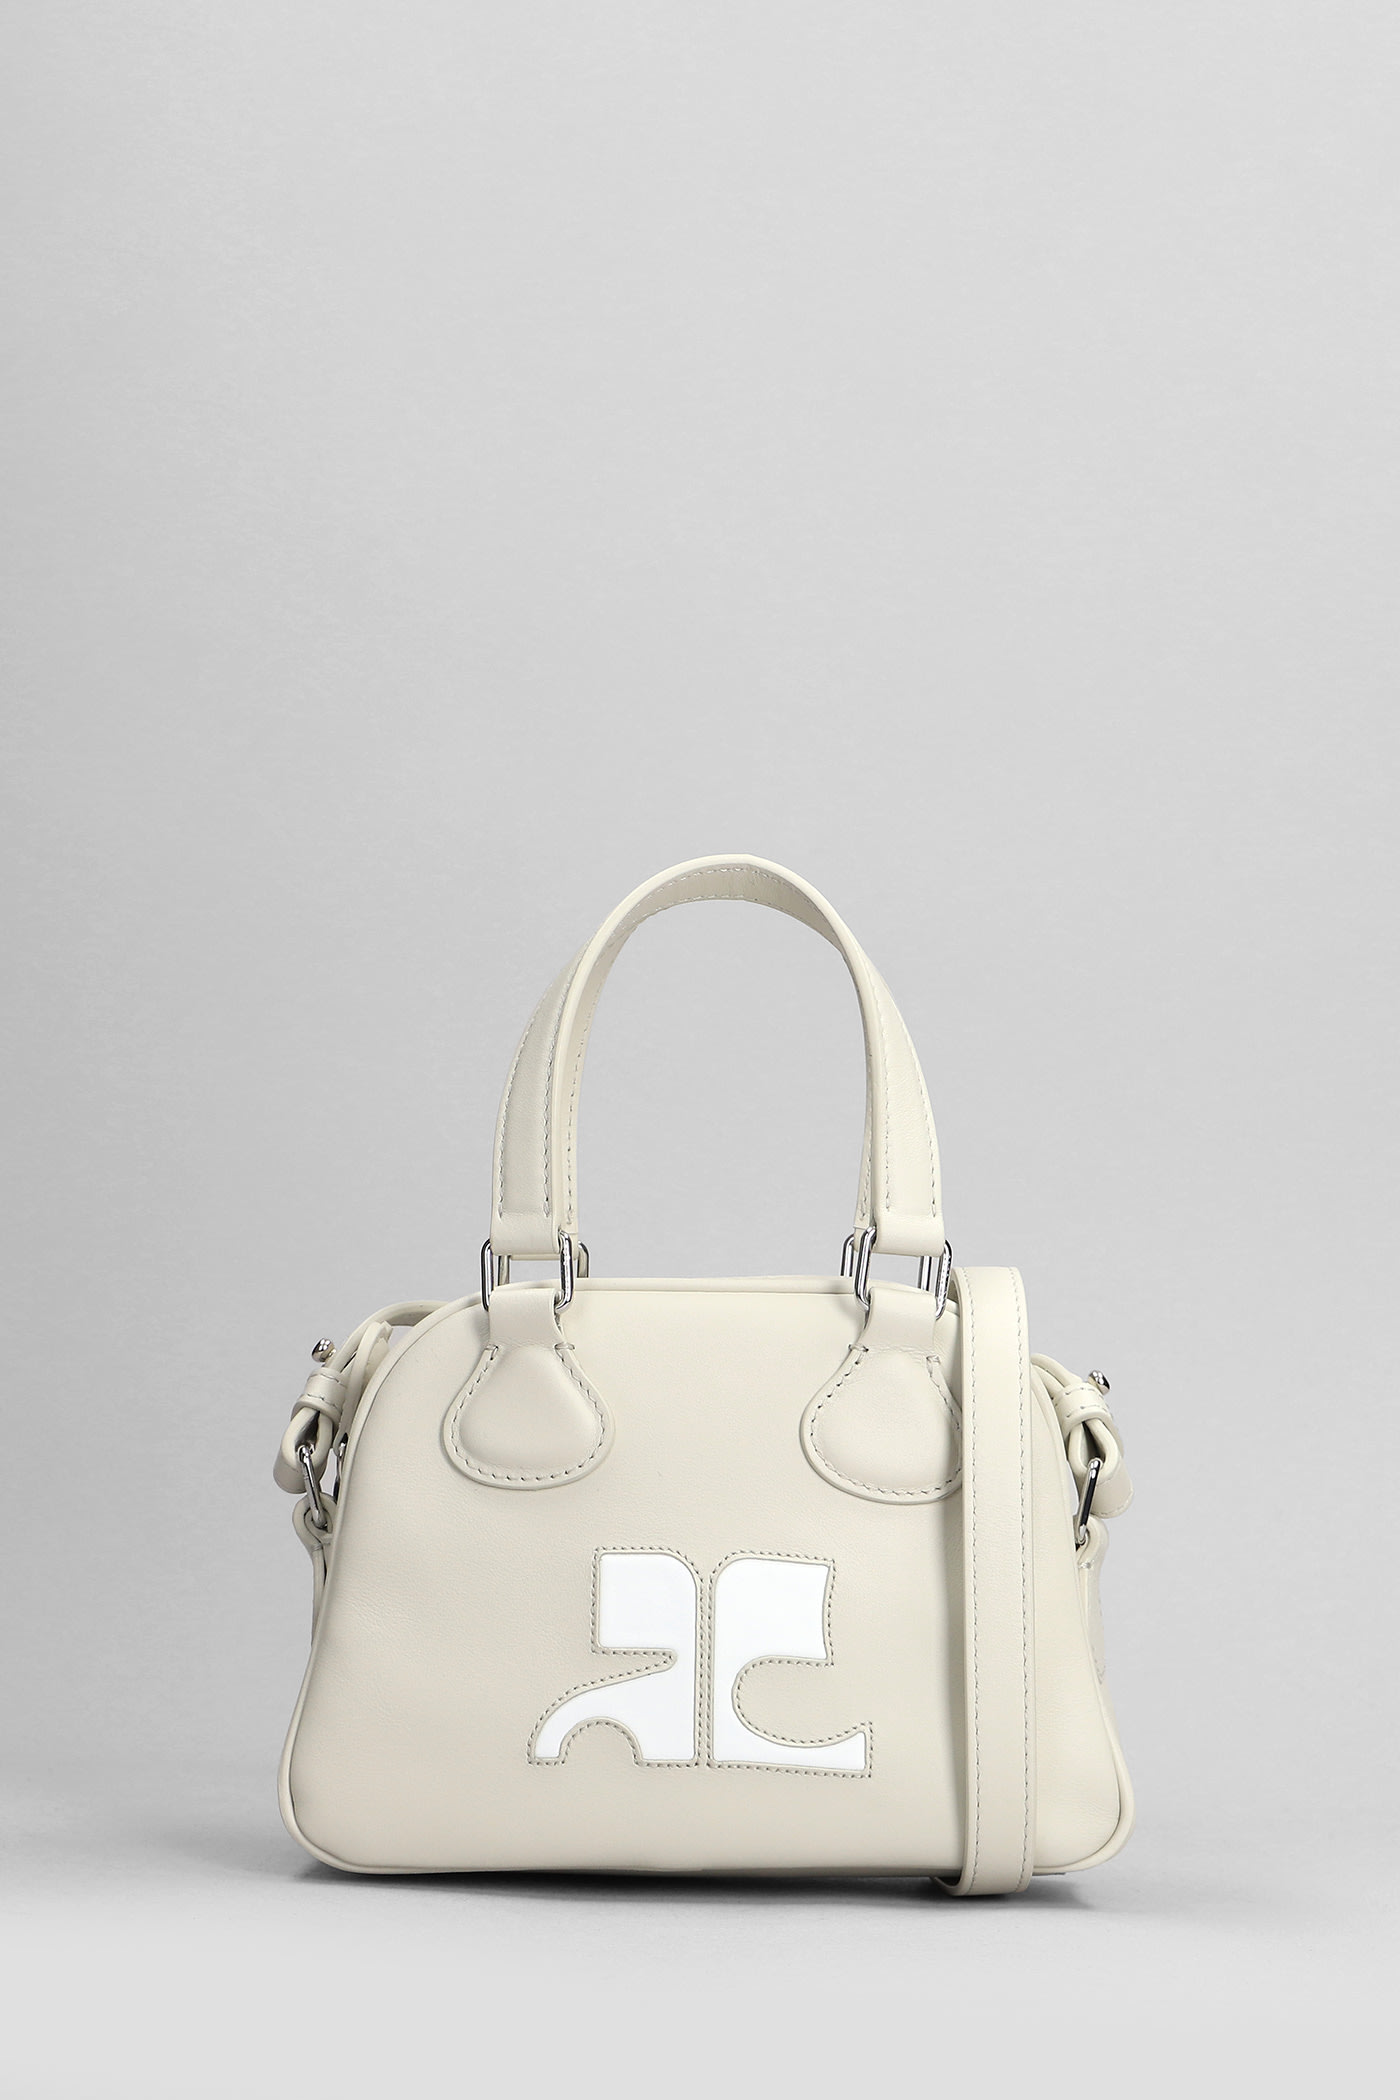 Courrèges Bowling Hand Bag In Beige Leather